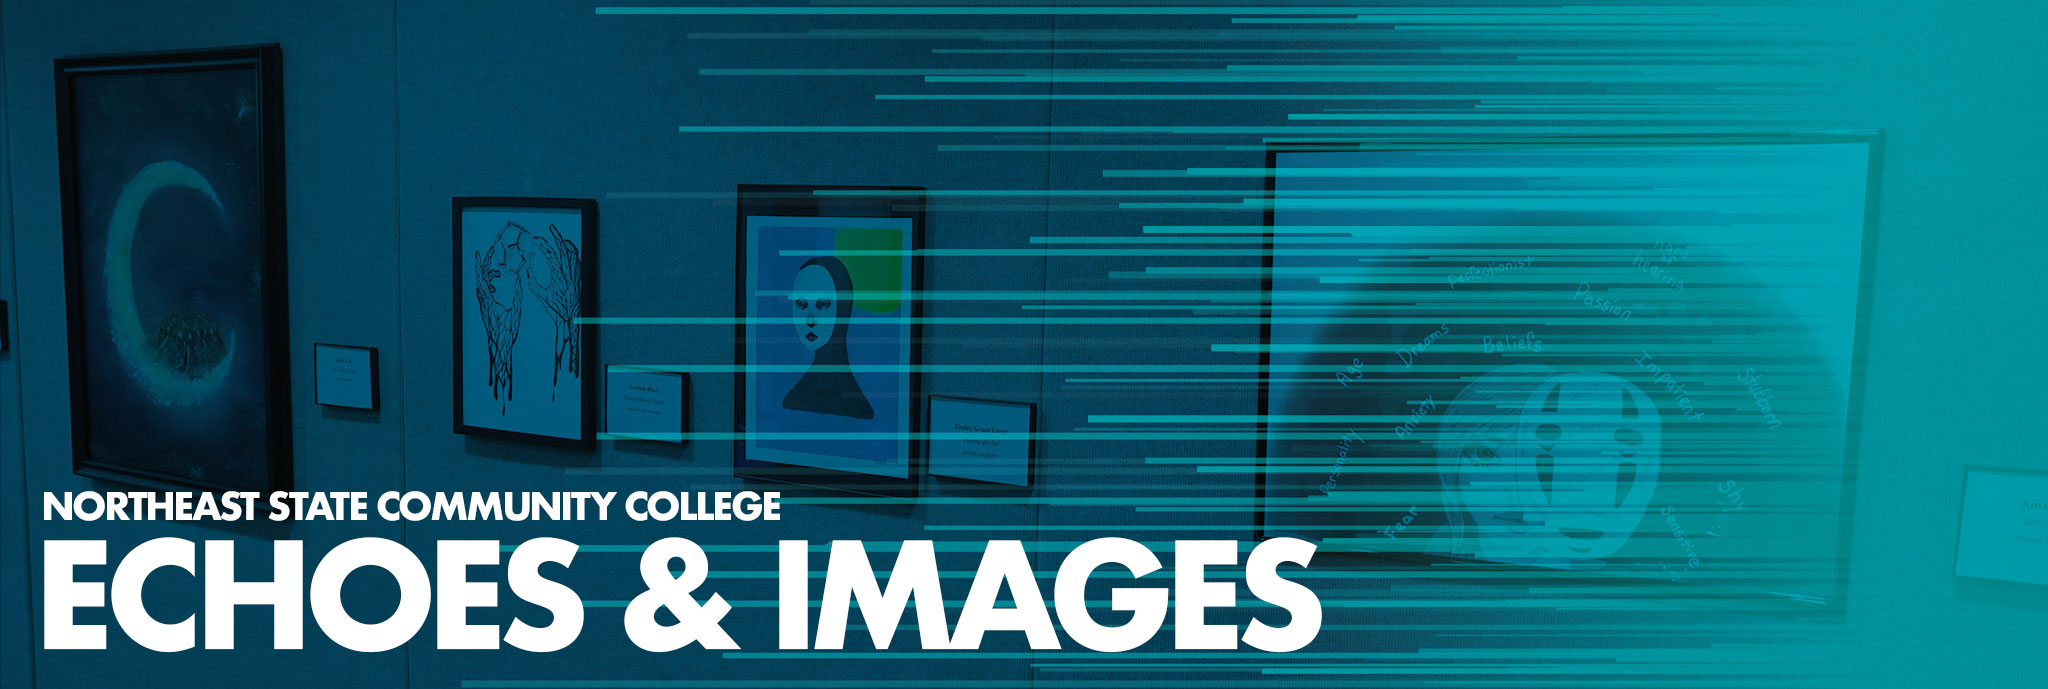 Northeast State Community College - Echoes & Images